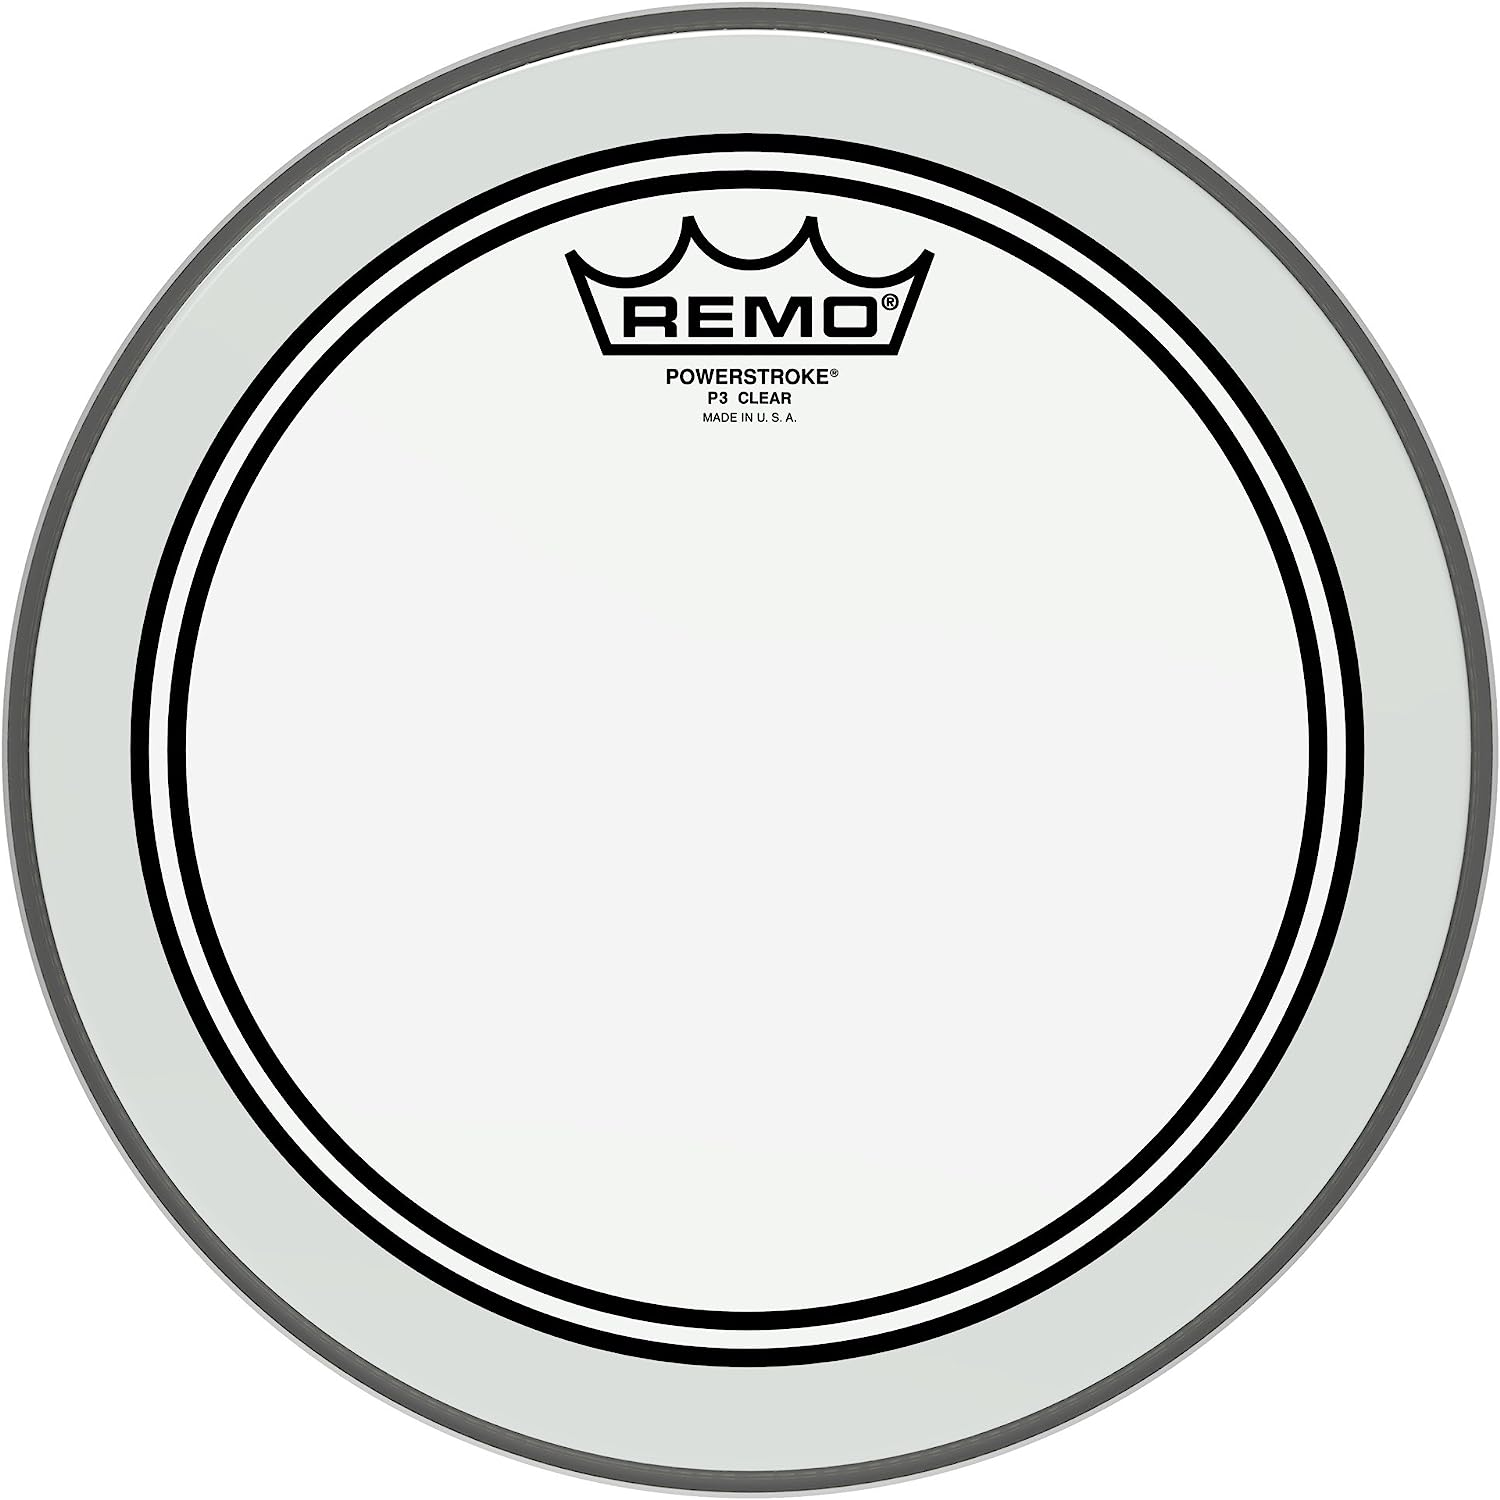 Remo P3-0310-BP, Batter, Powerstroke 3, Clear, Drum Head, 10 inch